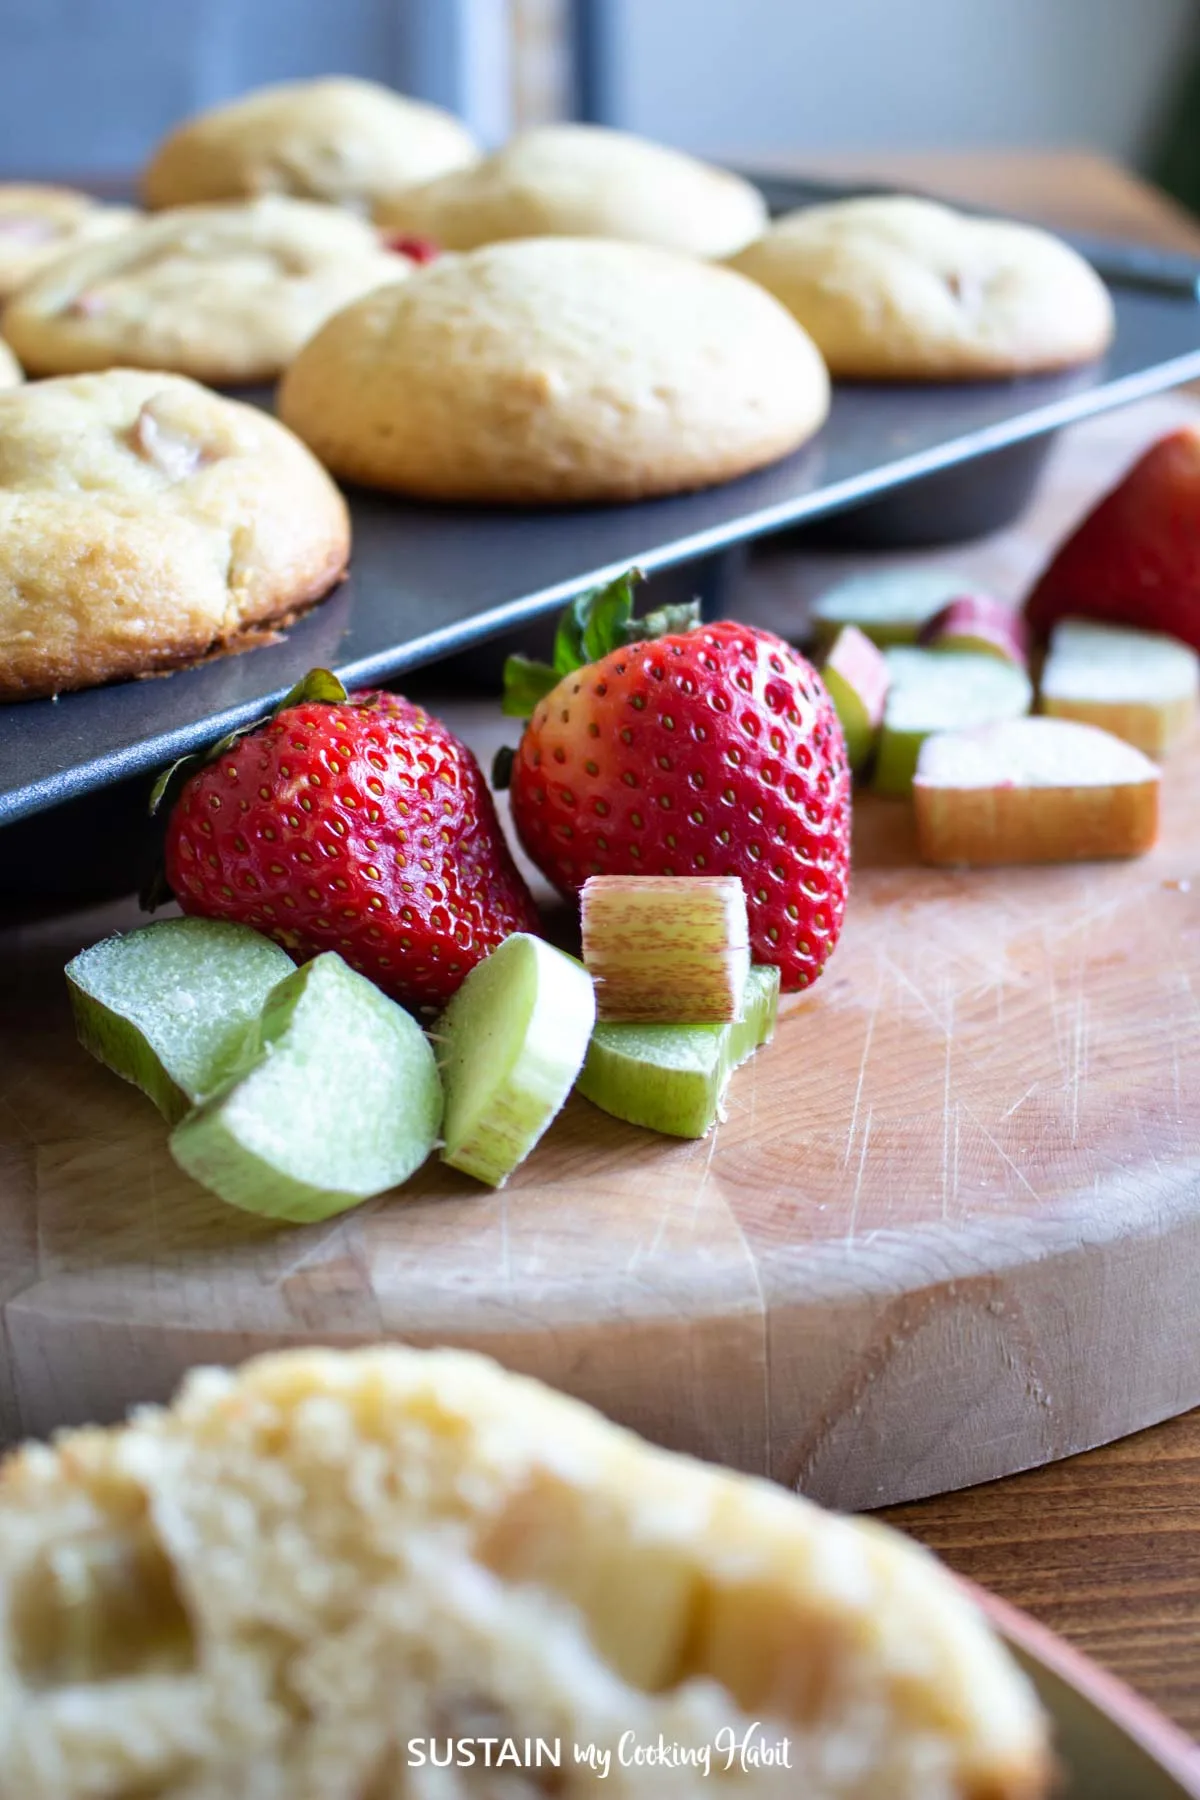 close up image of strawberries and cut rhubarb in front of freshly baked muffins